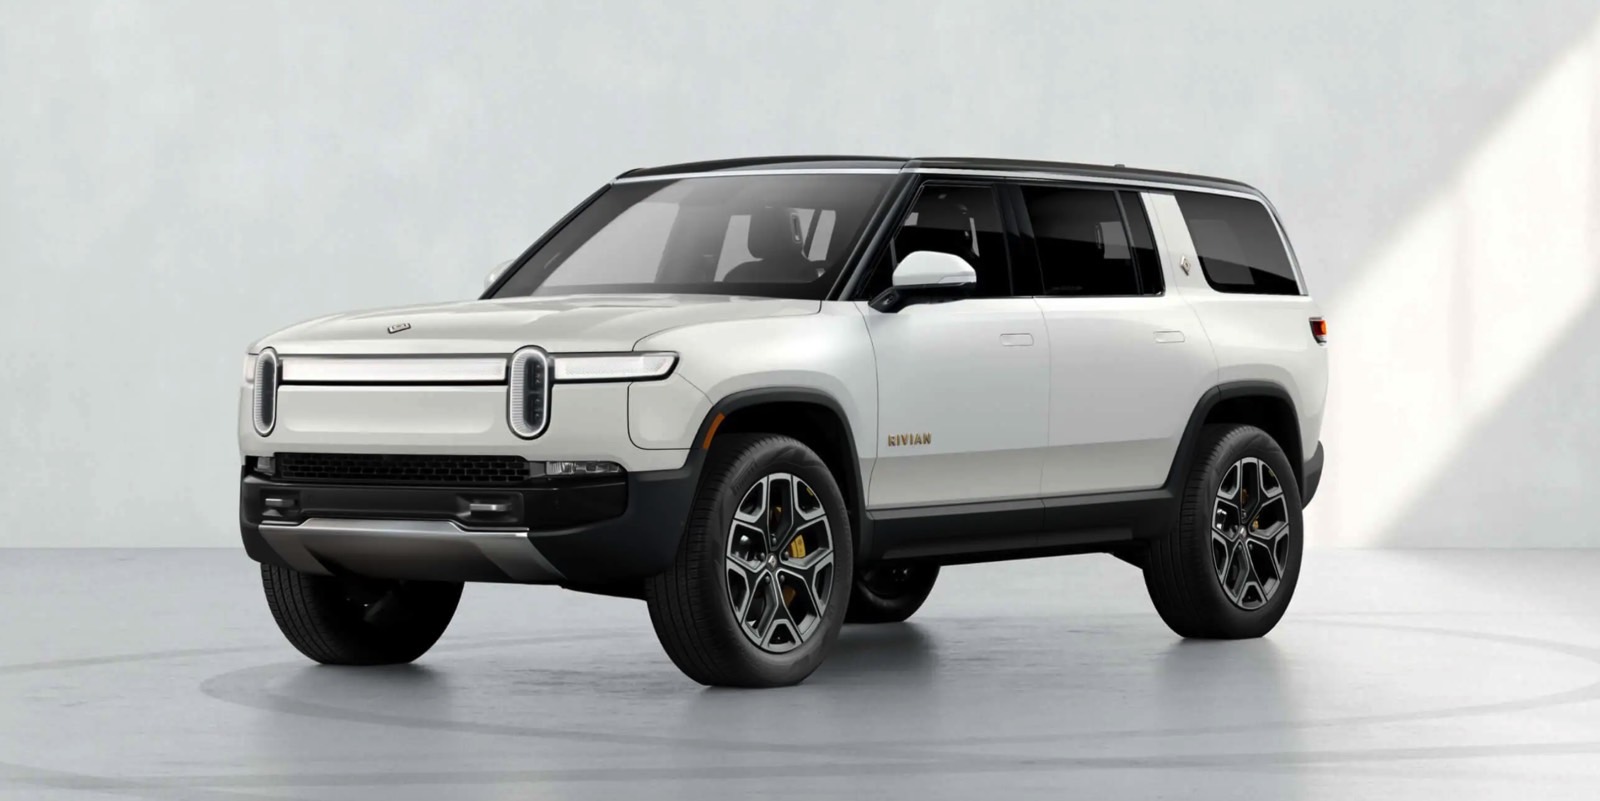 Rivian is the latest EV maker to adopt Tesla’s NACS charging port